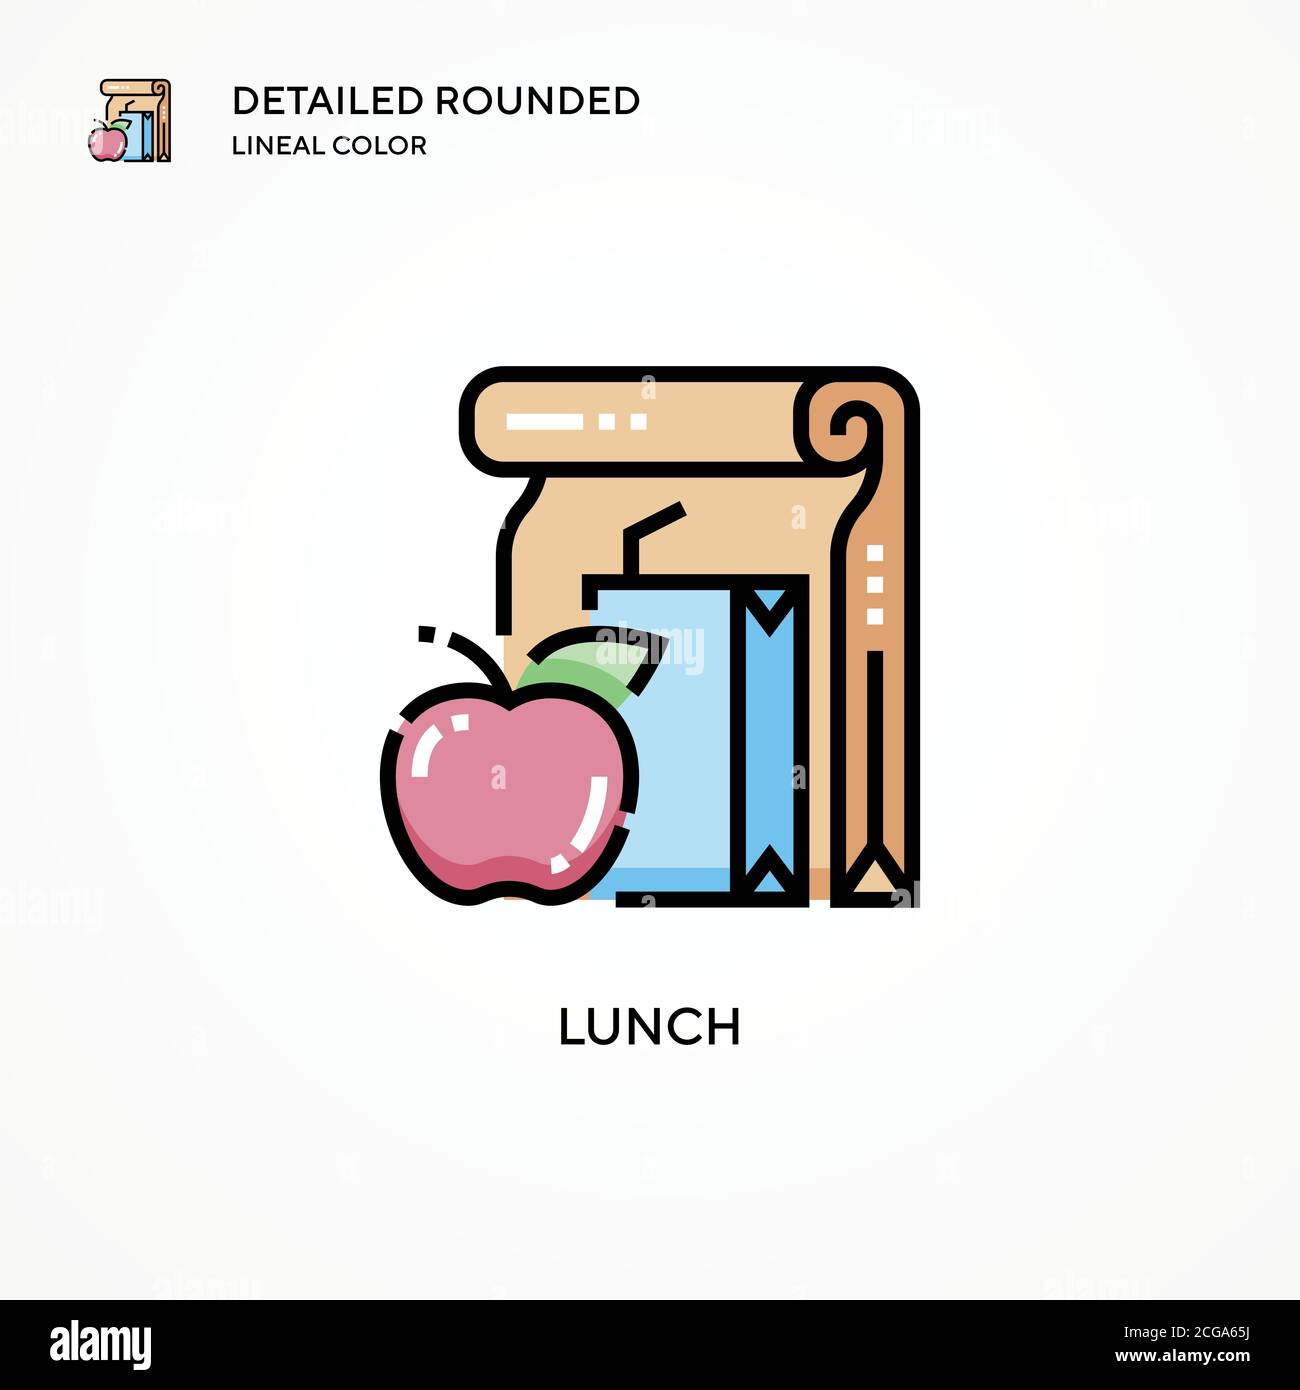 Lunch vector icon. Modern vector illustration concepts. Easy to edit and customize. Stock Vector